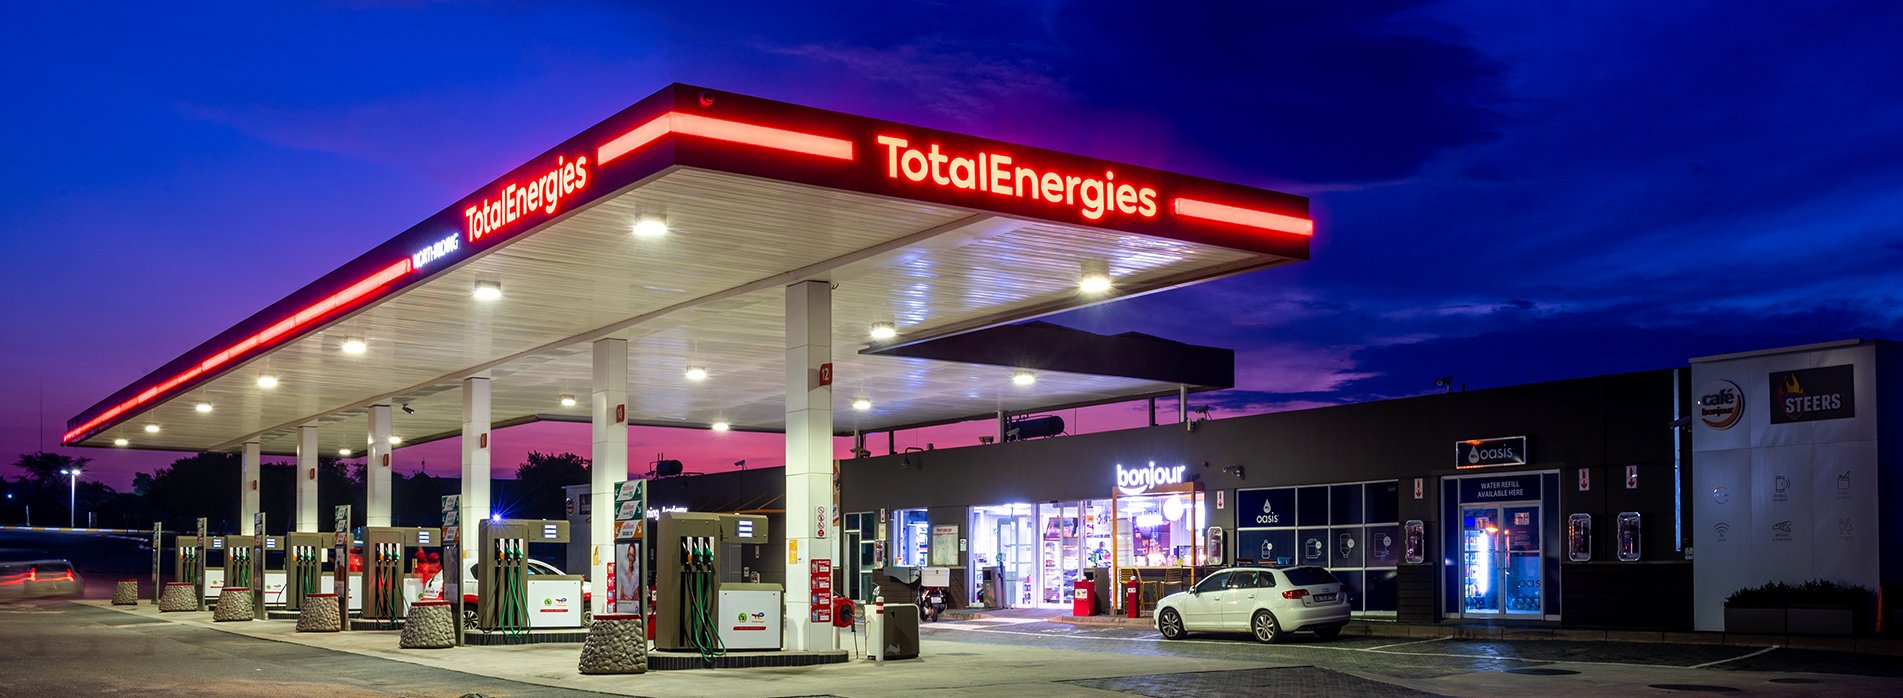 Service stations by TotalEnergies